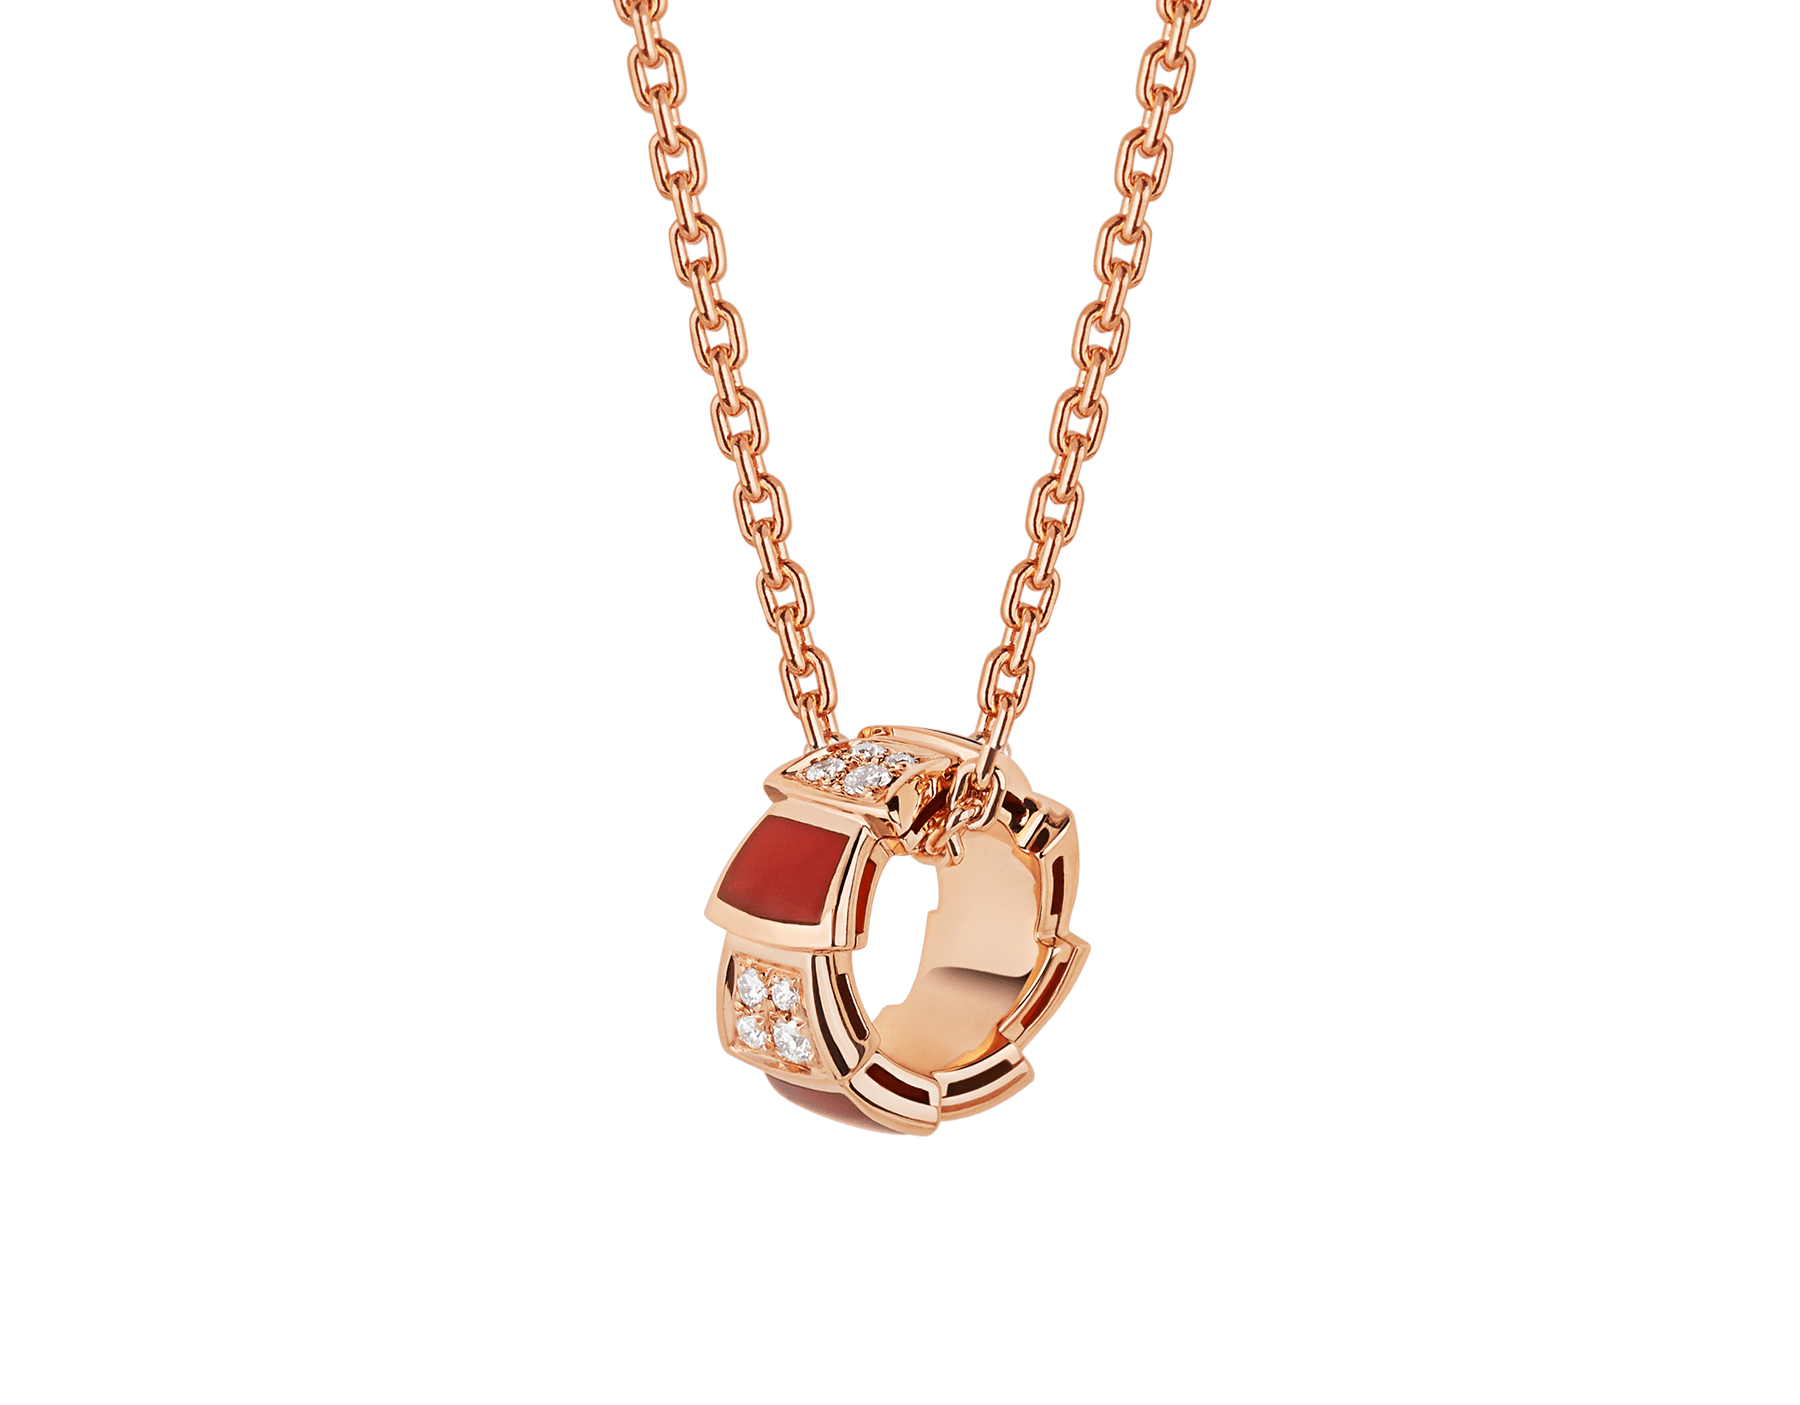 Wholesale Custom design OEM/ODM Jewelry necklace with 18 kt rose gold chain and 18 kt rose gold pendant set with carnelian elements and demi-pavé diamonds